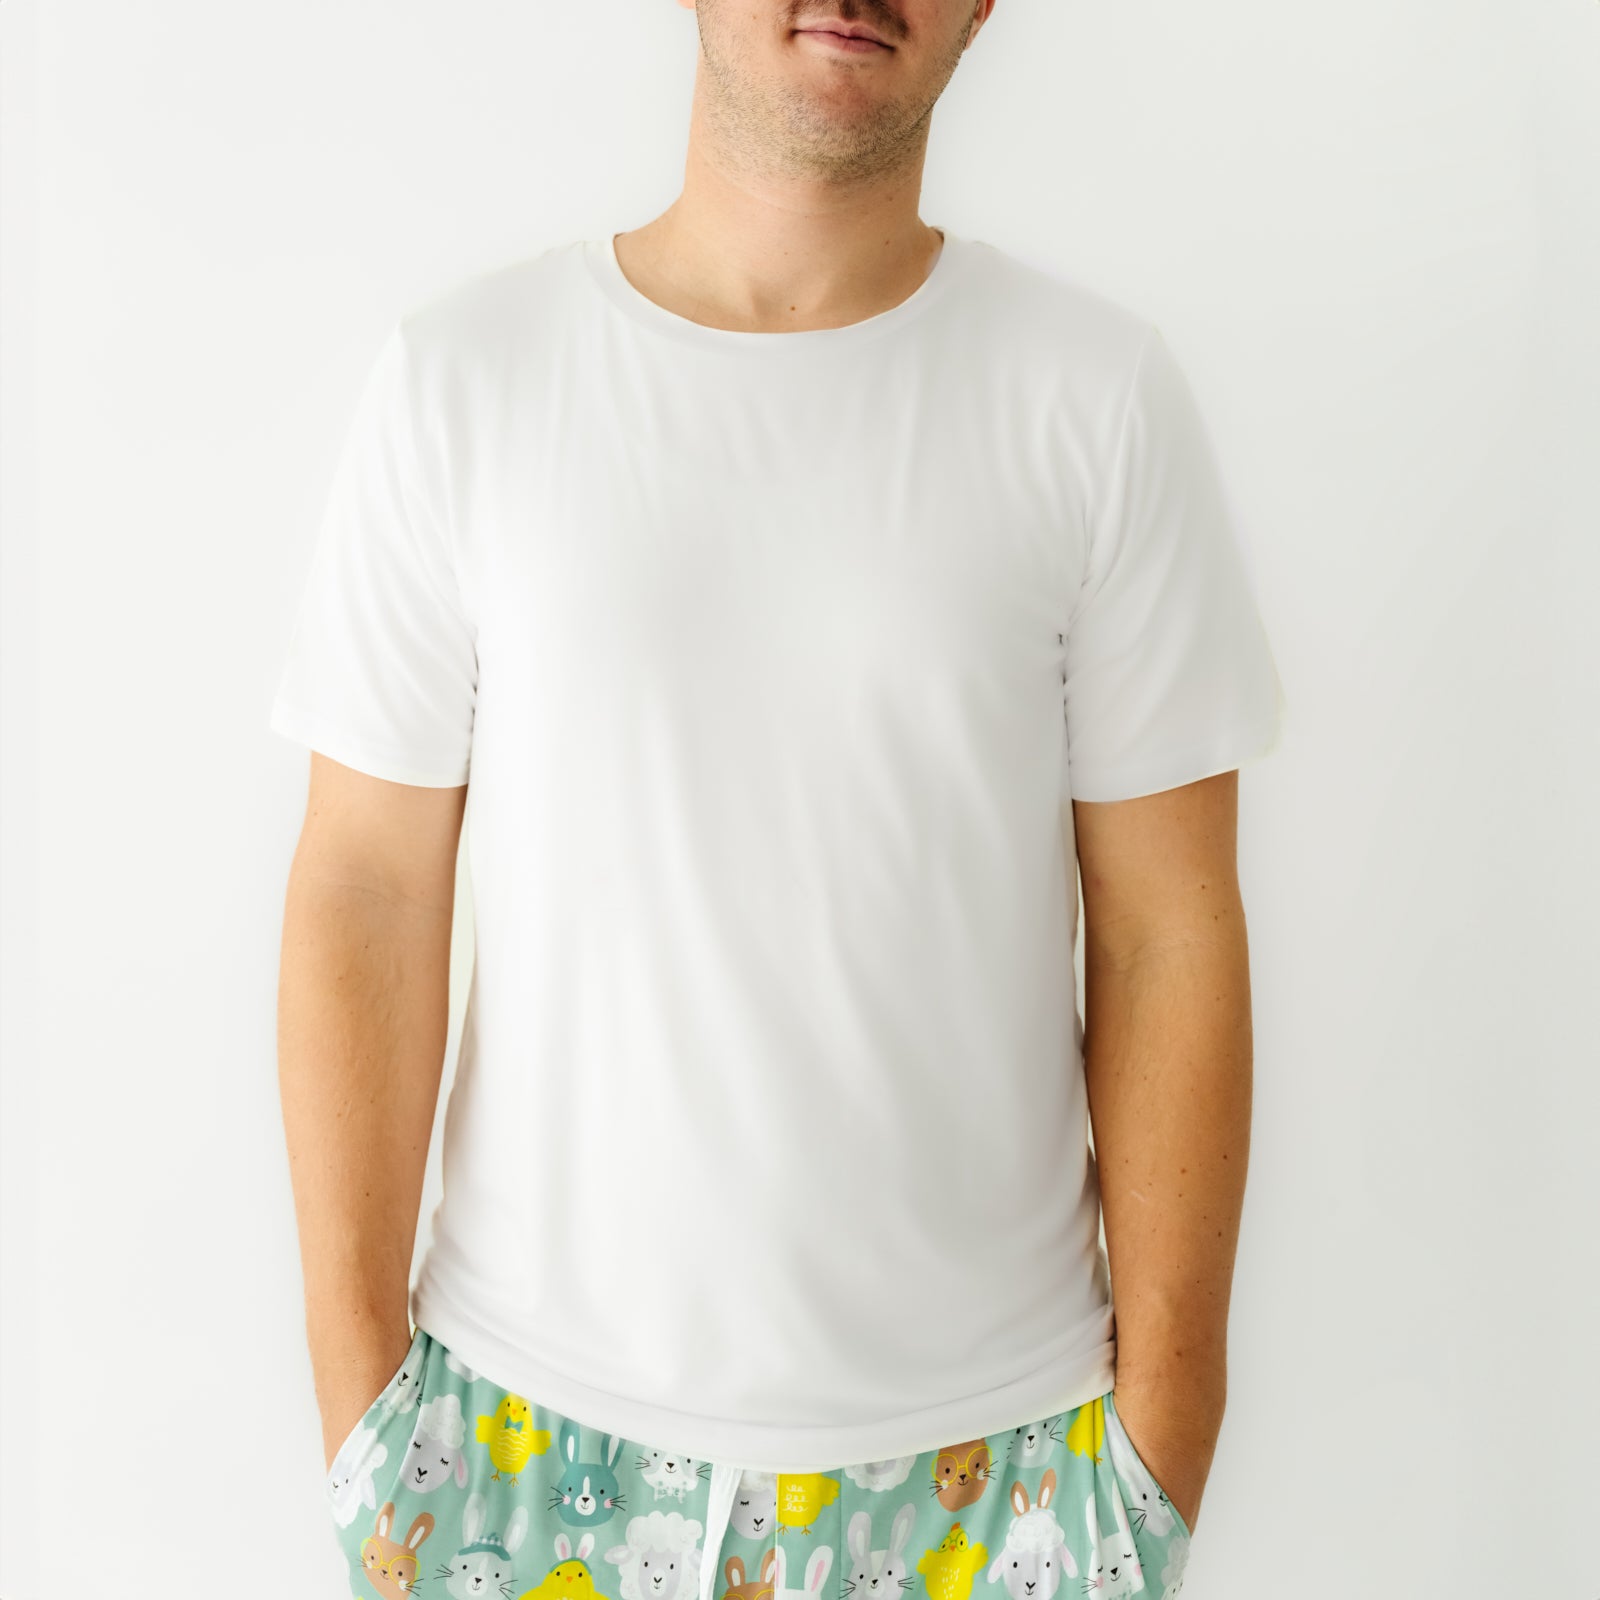 Close up image of a man wearing Aqua Pastel Parade men's pajama pants paired with a Bright White men's short sleeve pajama top